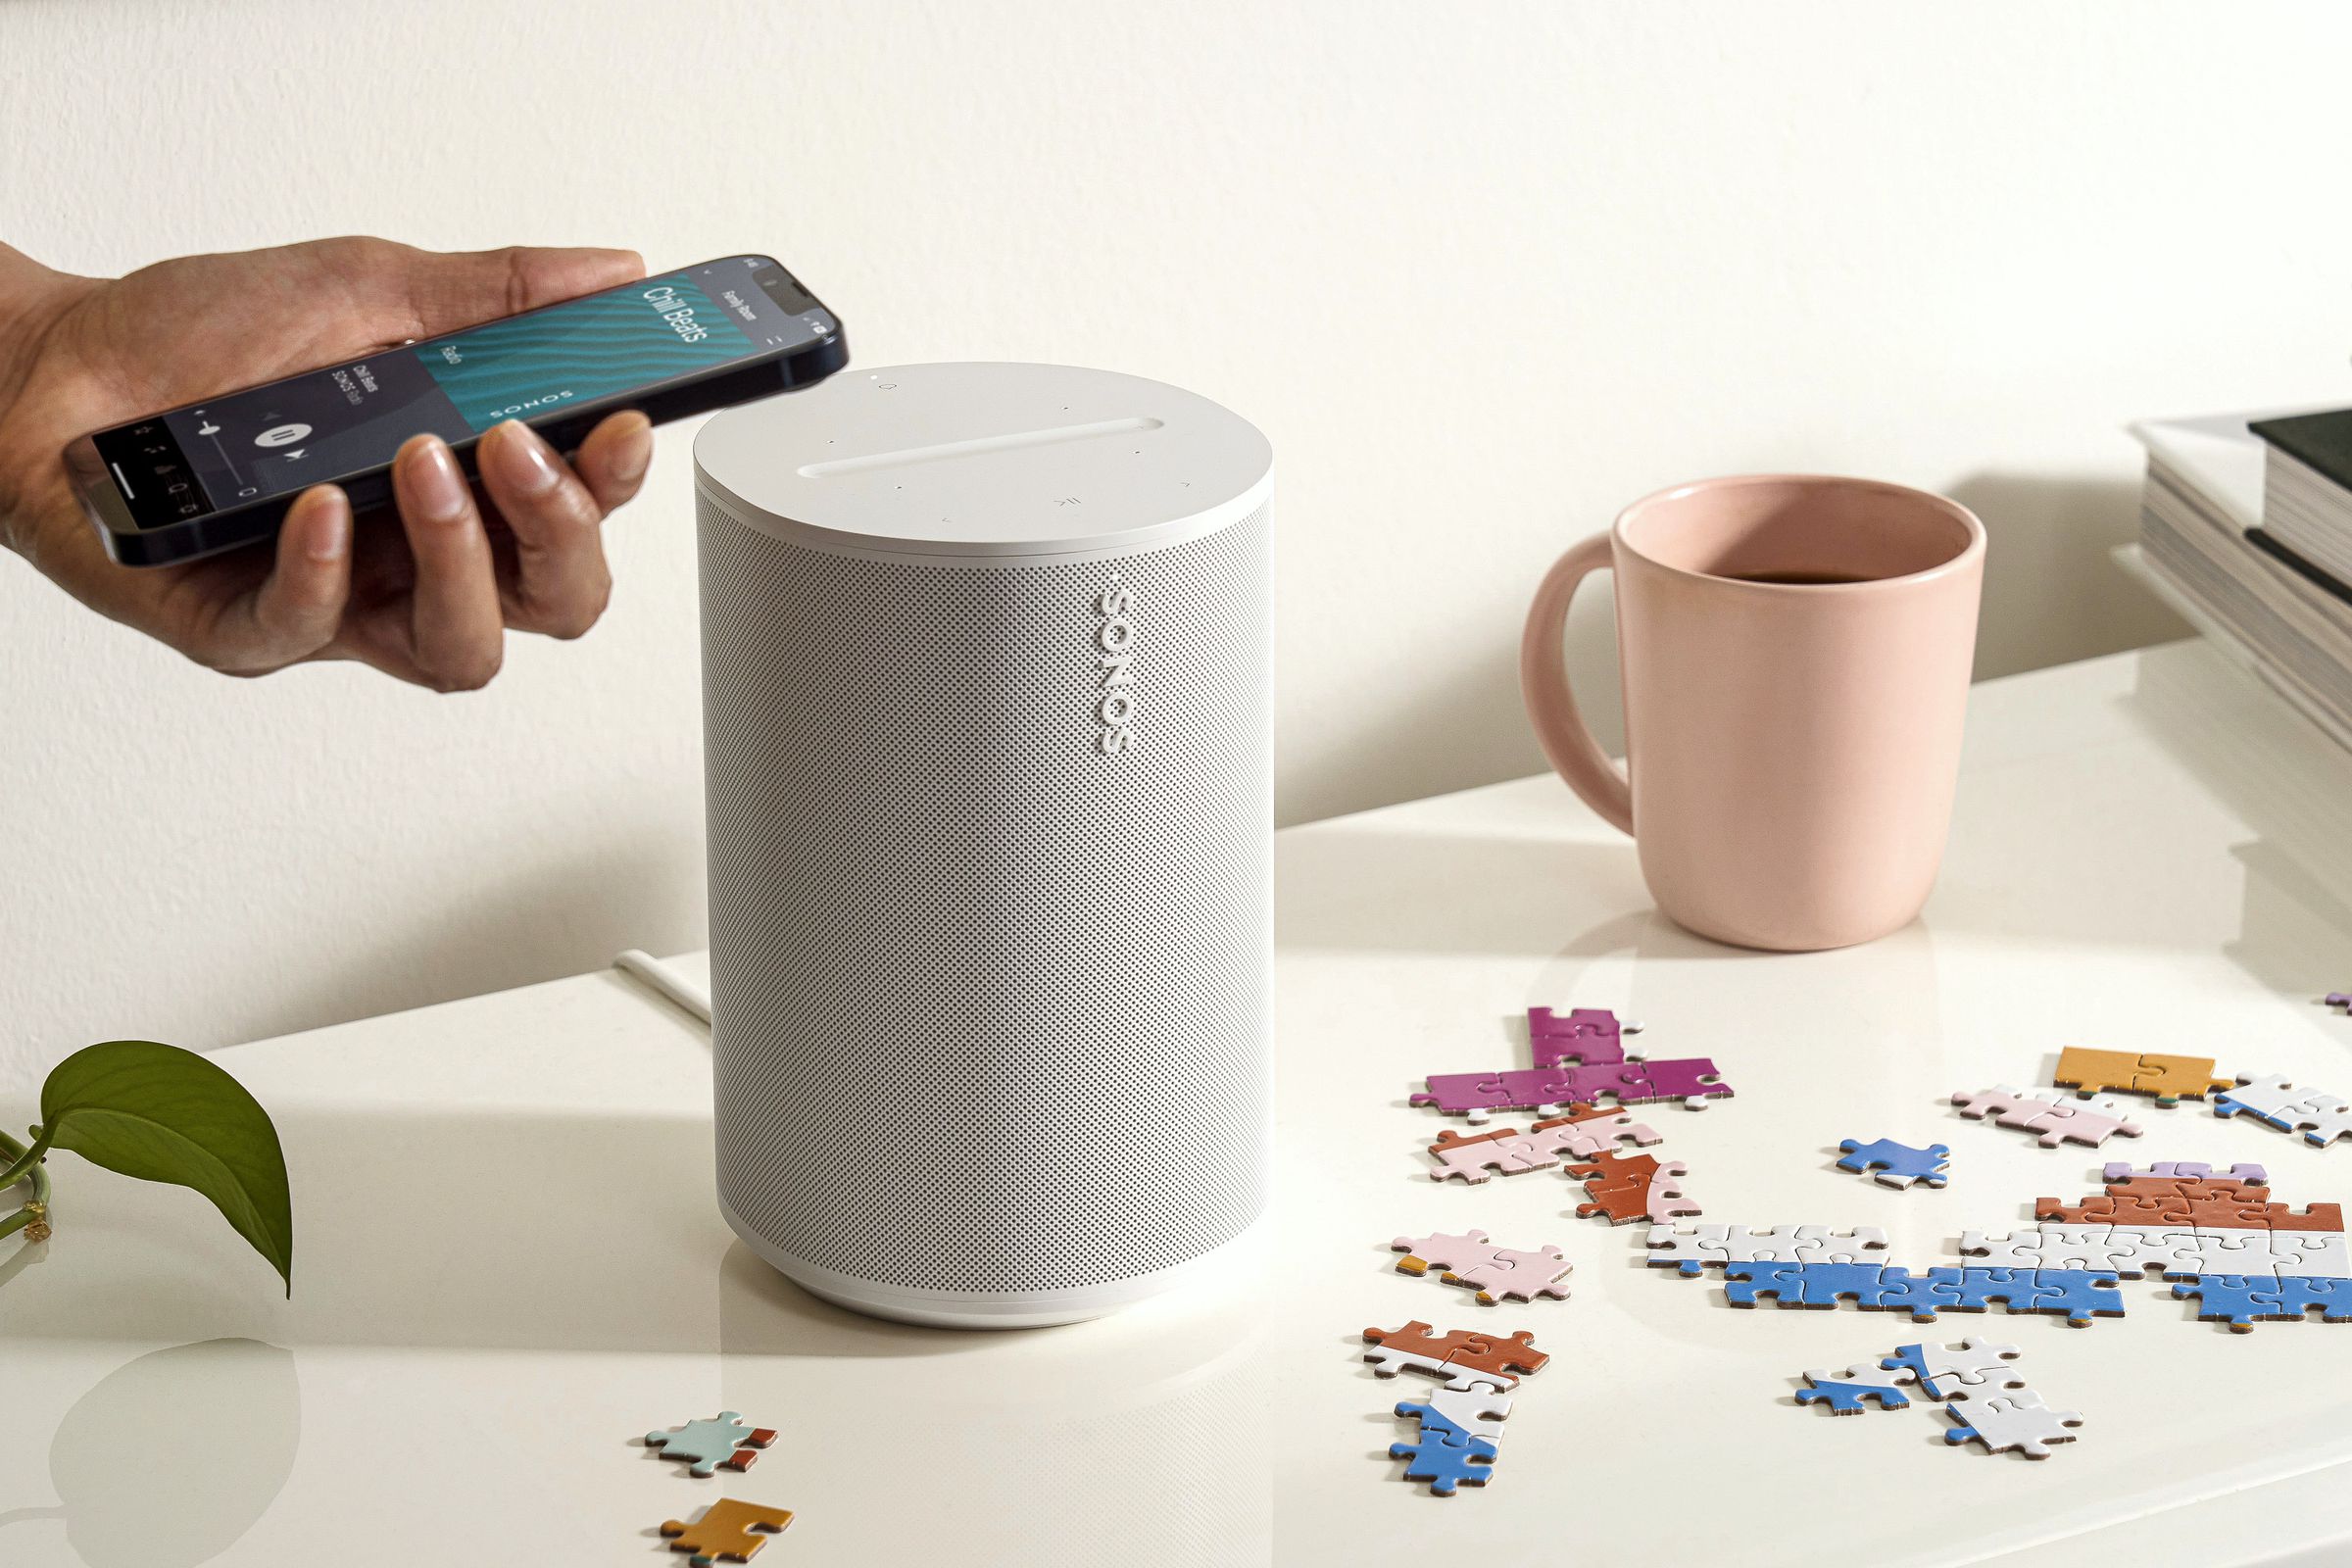 A marketing image of the Sonos Era 100 on a white table.